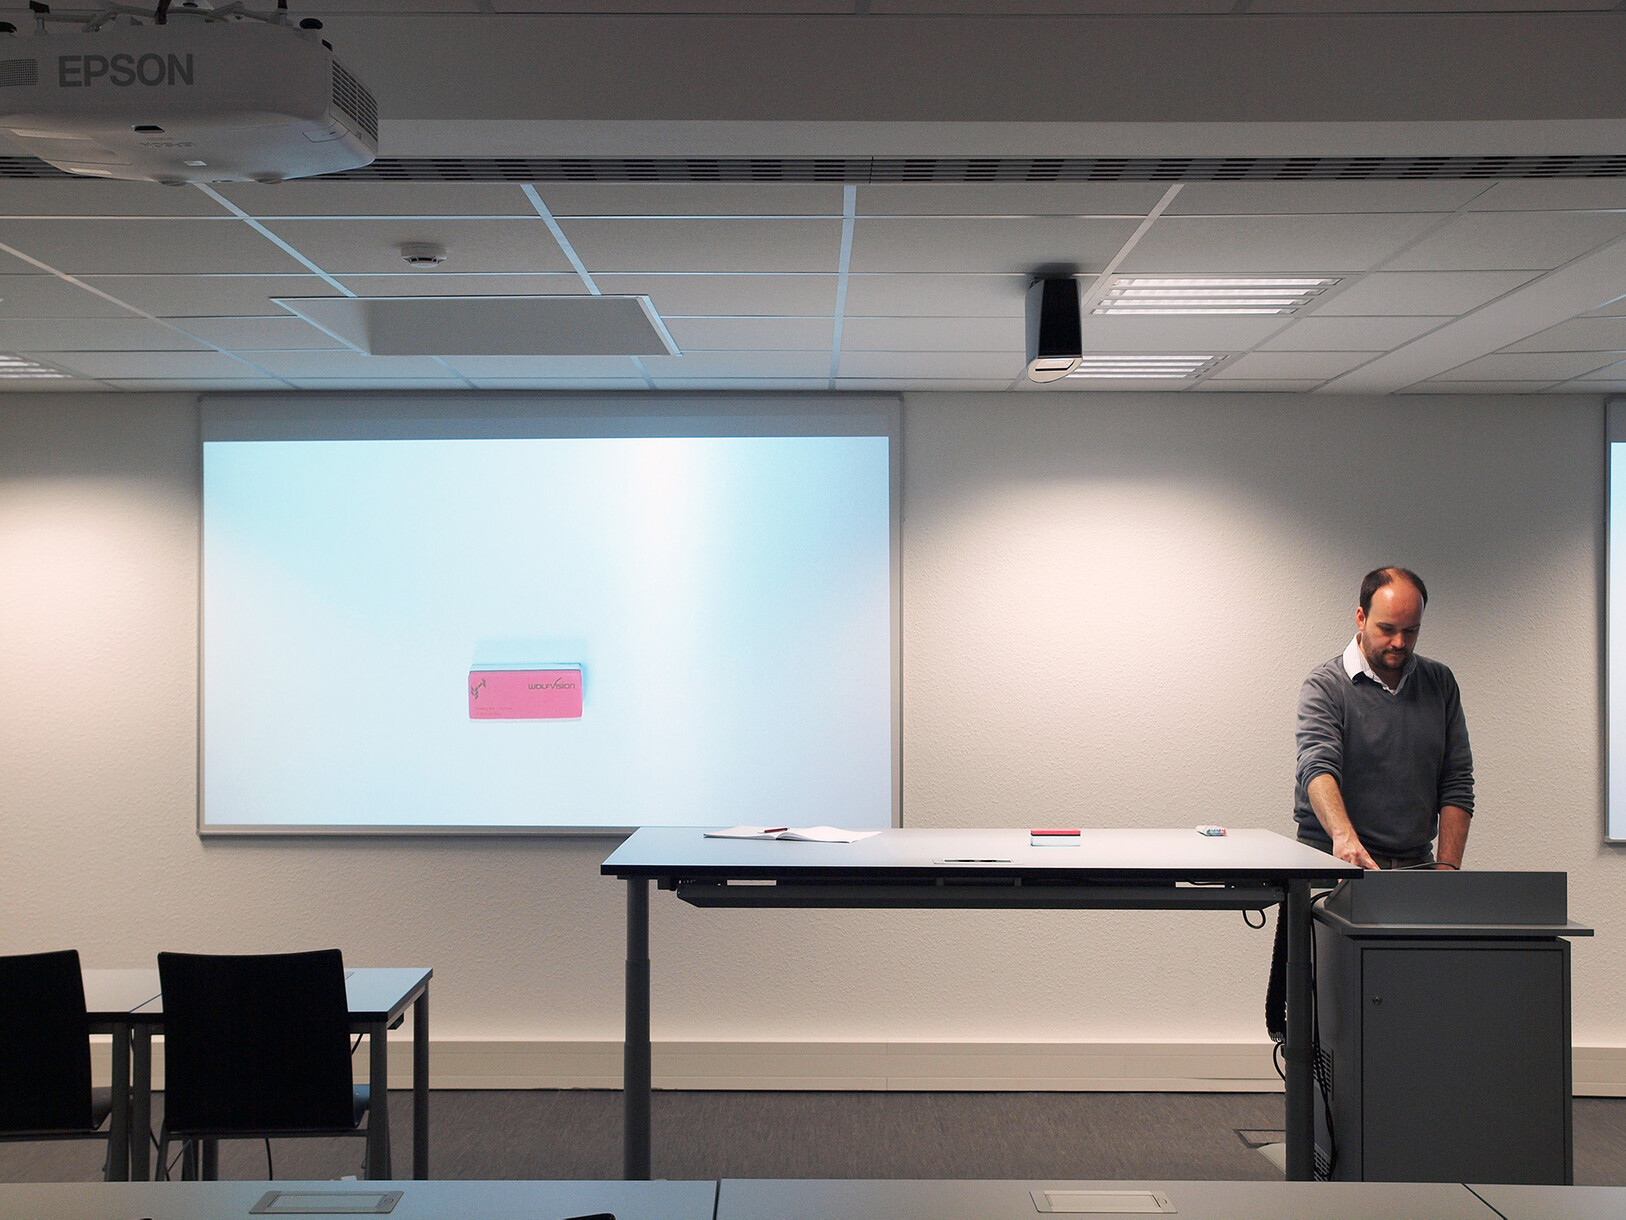 At the University of Siegen, Faculty III, two rooms were equipped with WolfVision VZ-C6 Ceiling Visualizer systems.